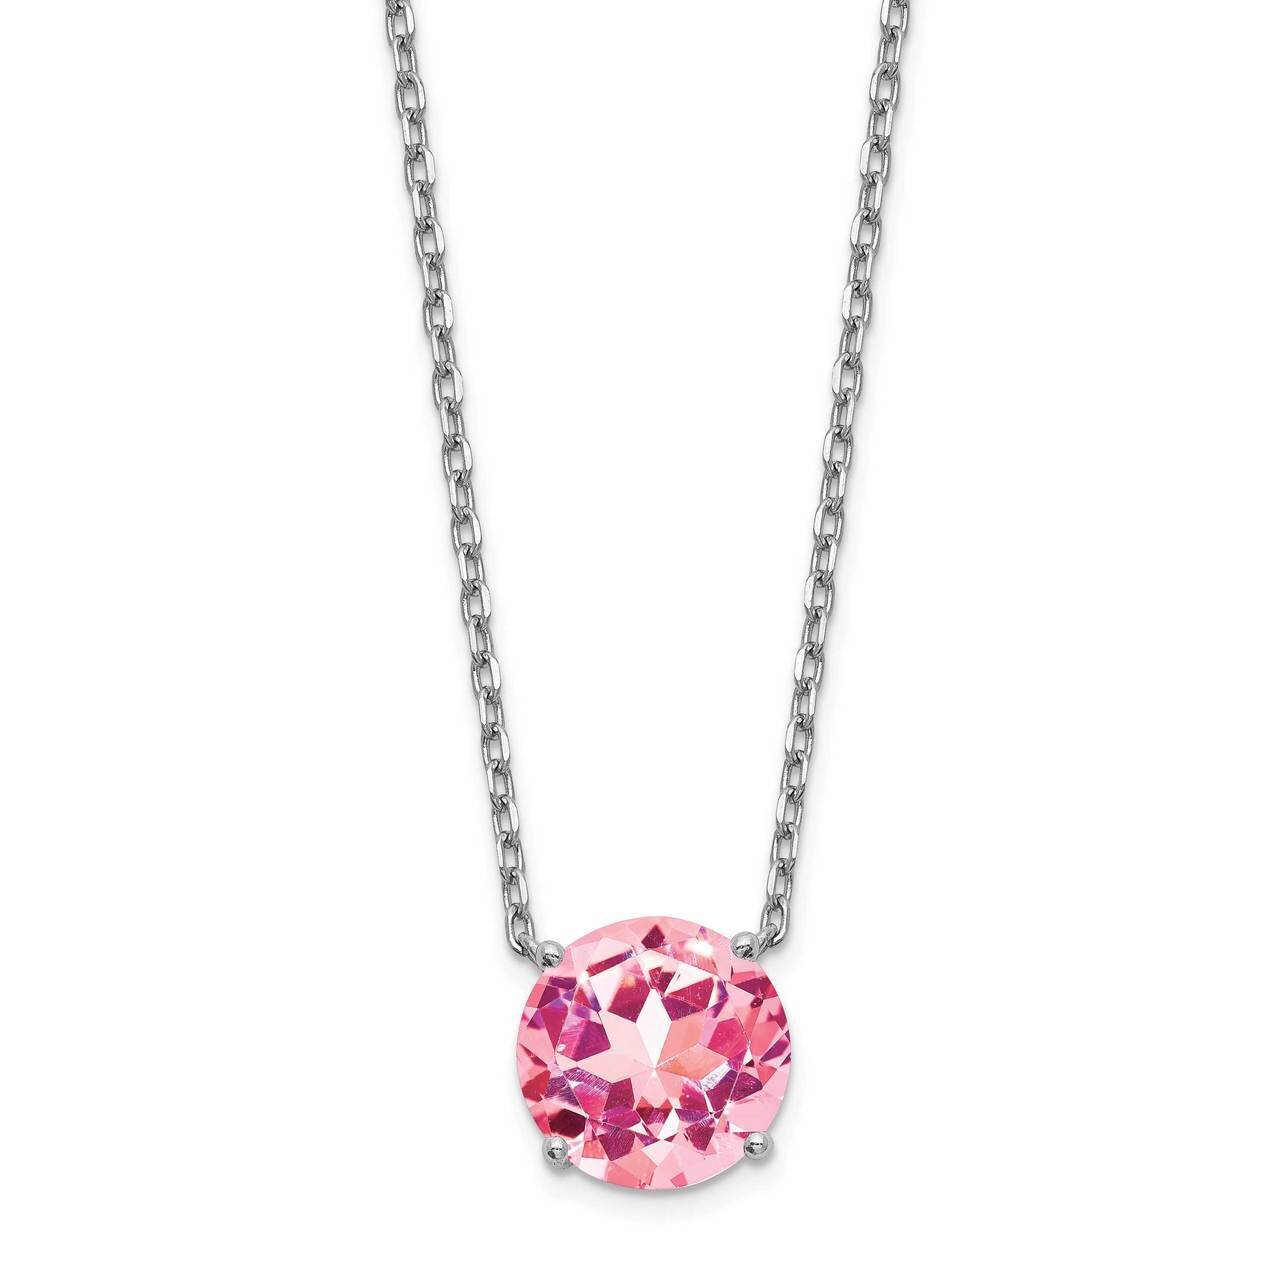 Pink Swarovski Crystal with 2 inch Extender Necklace Sterling Silver Rhodium-plated QG5533-16.5